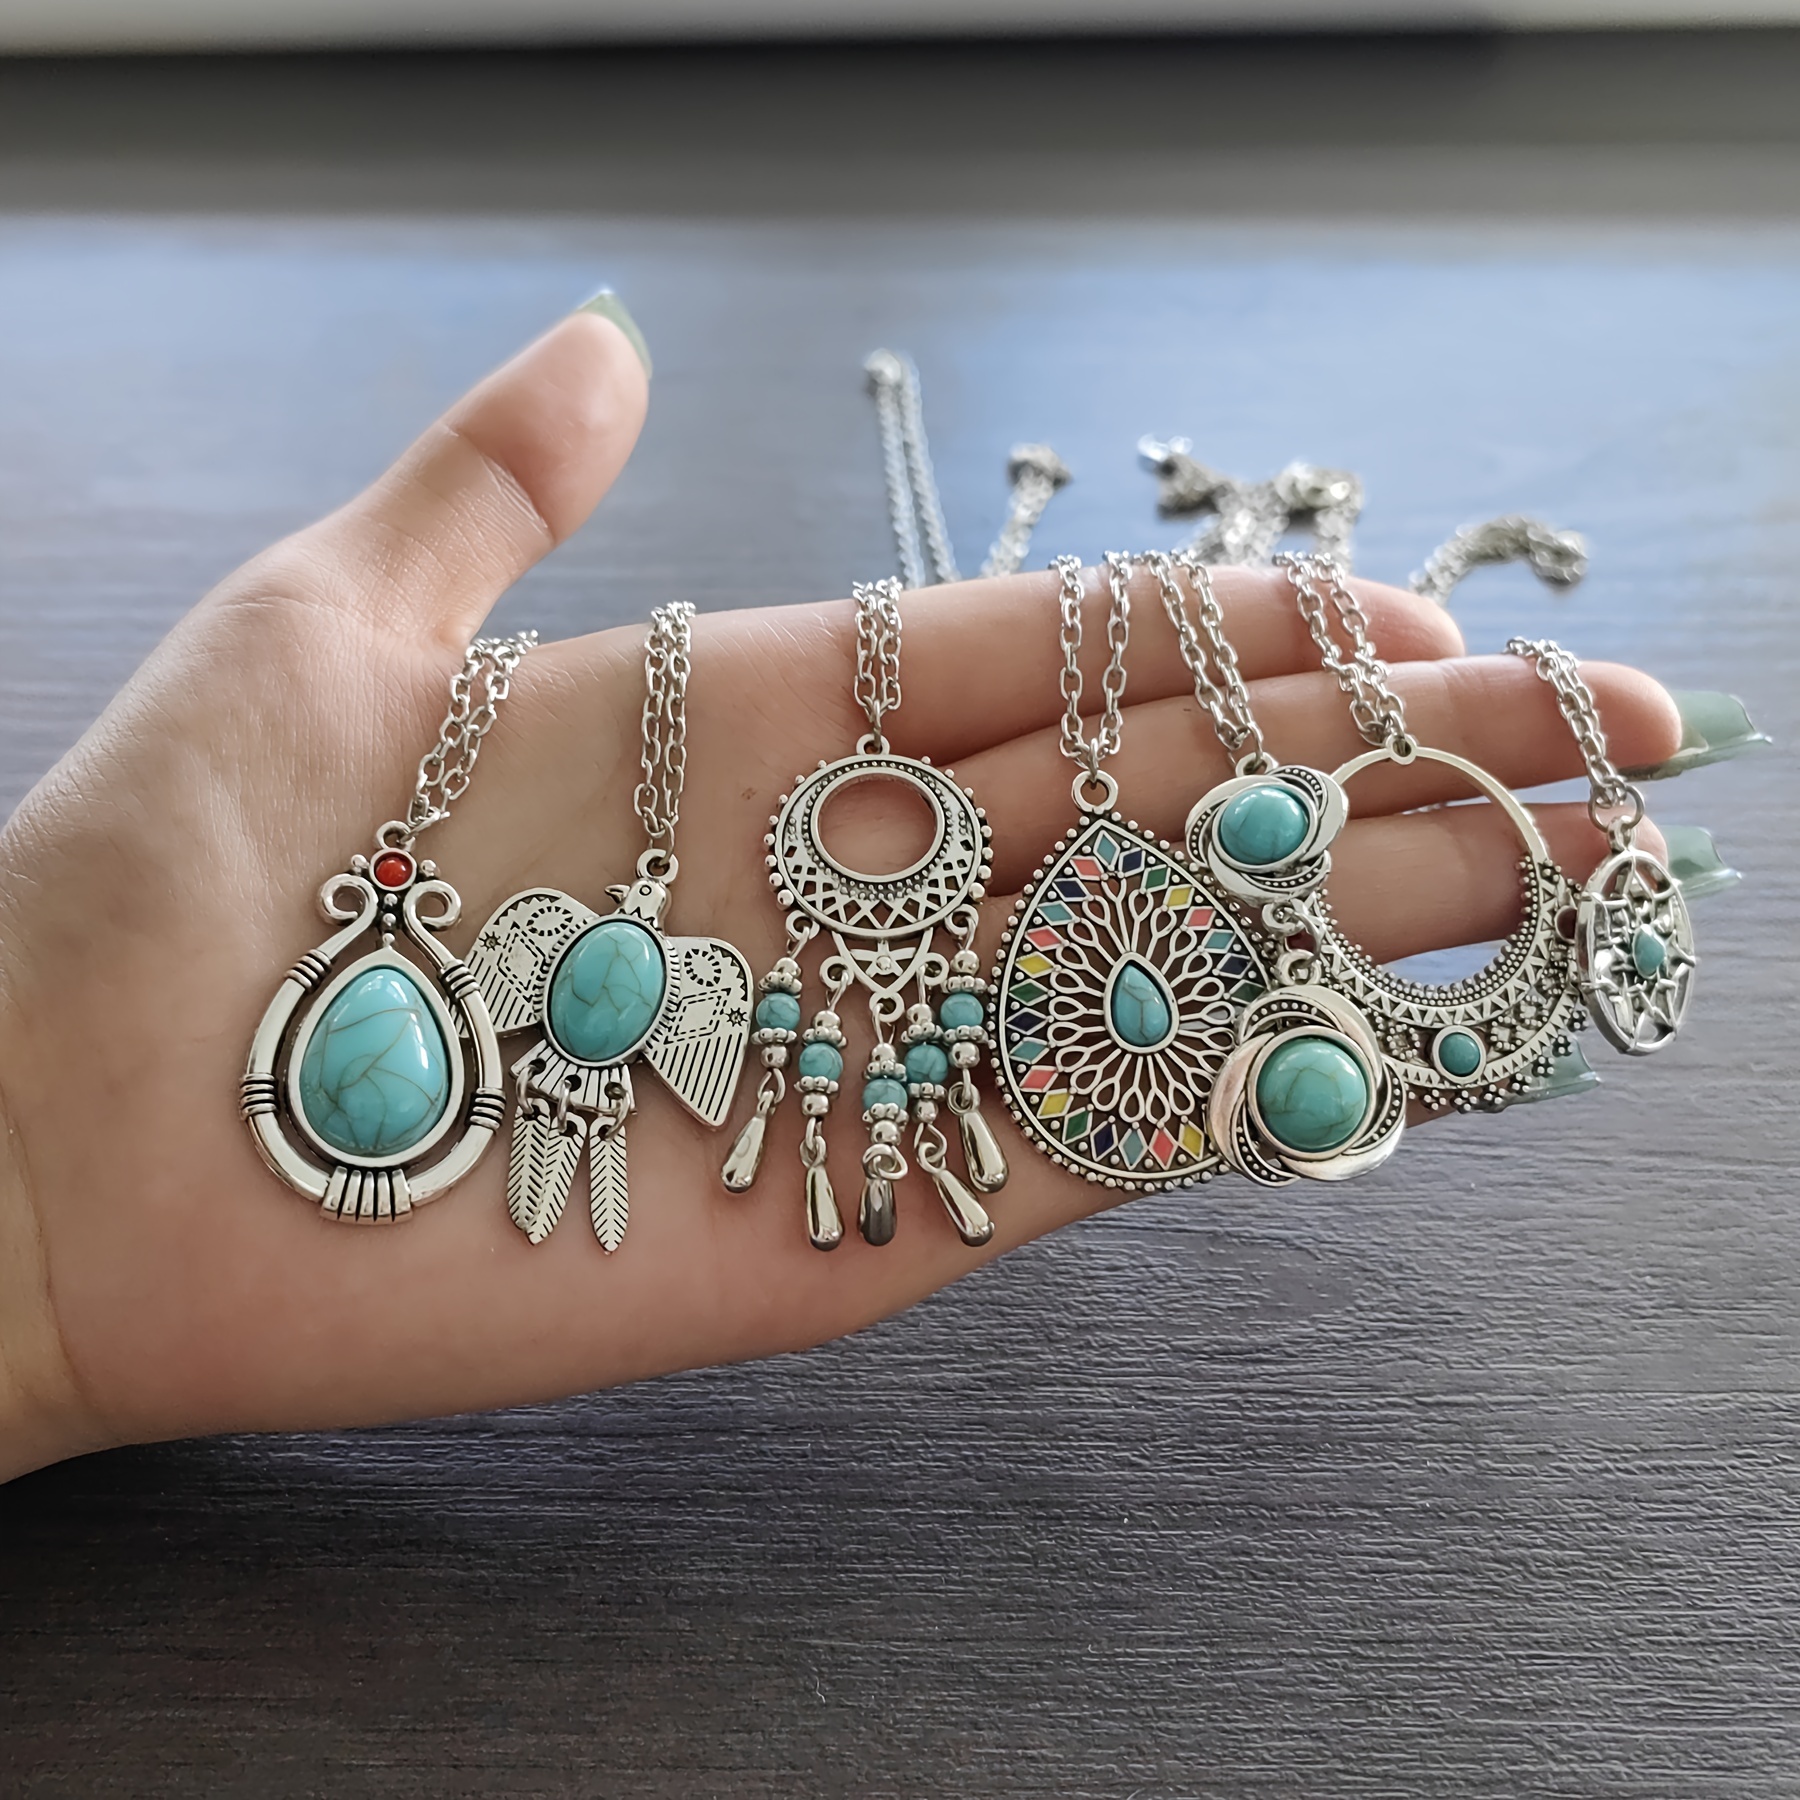 

14pcs/set Retro Ethnic Style Necklace Jewelry Set - Ancient Silvery Leaf, Flower, Waterdrop, Geometric Shape, Inlaid Turquoise Pendant Necklace Set, Perfect For Daily Outfits And Parties, Vacation